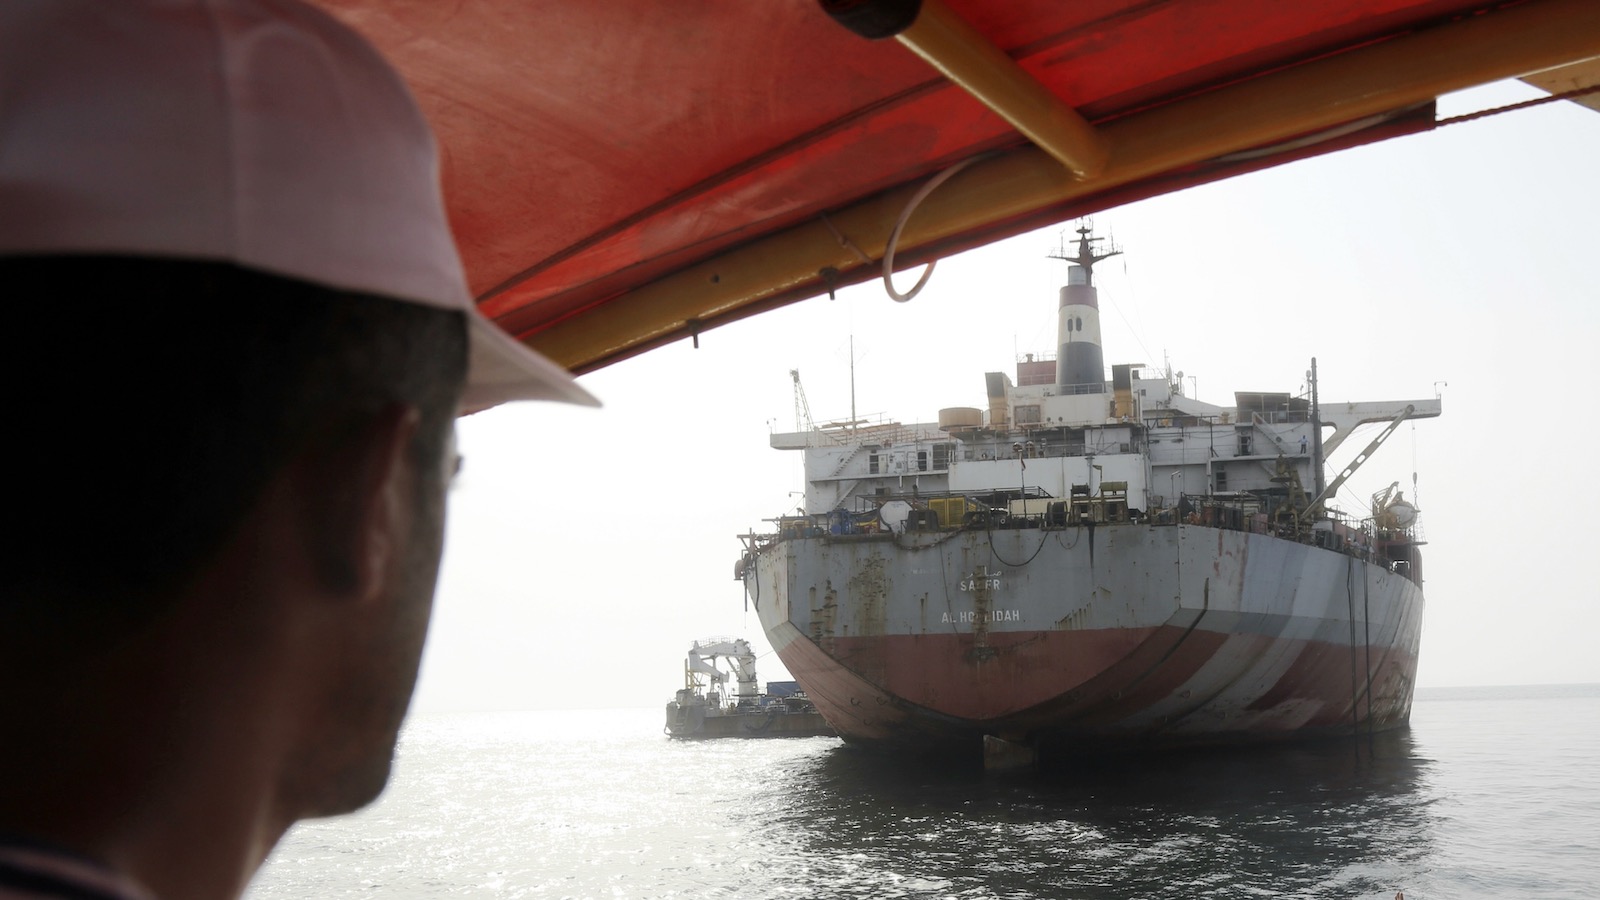 A man in a ballcap stands beneath the awning on the deck of a small ship approaching the FSO Safer, a decaying oil tanker on the Red Sea.